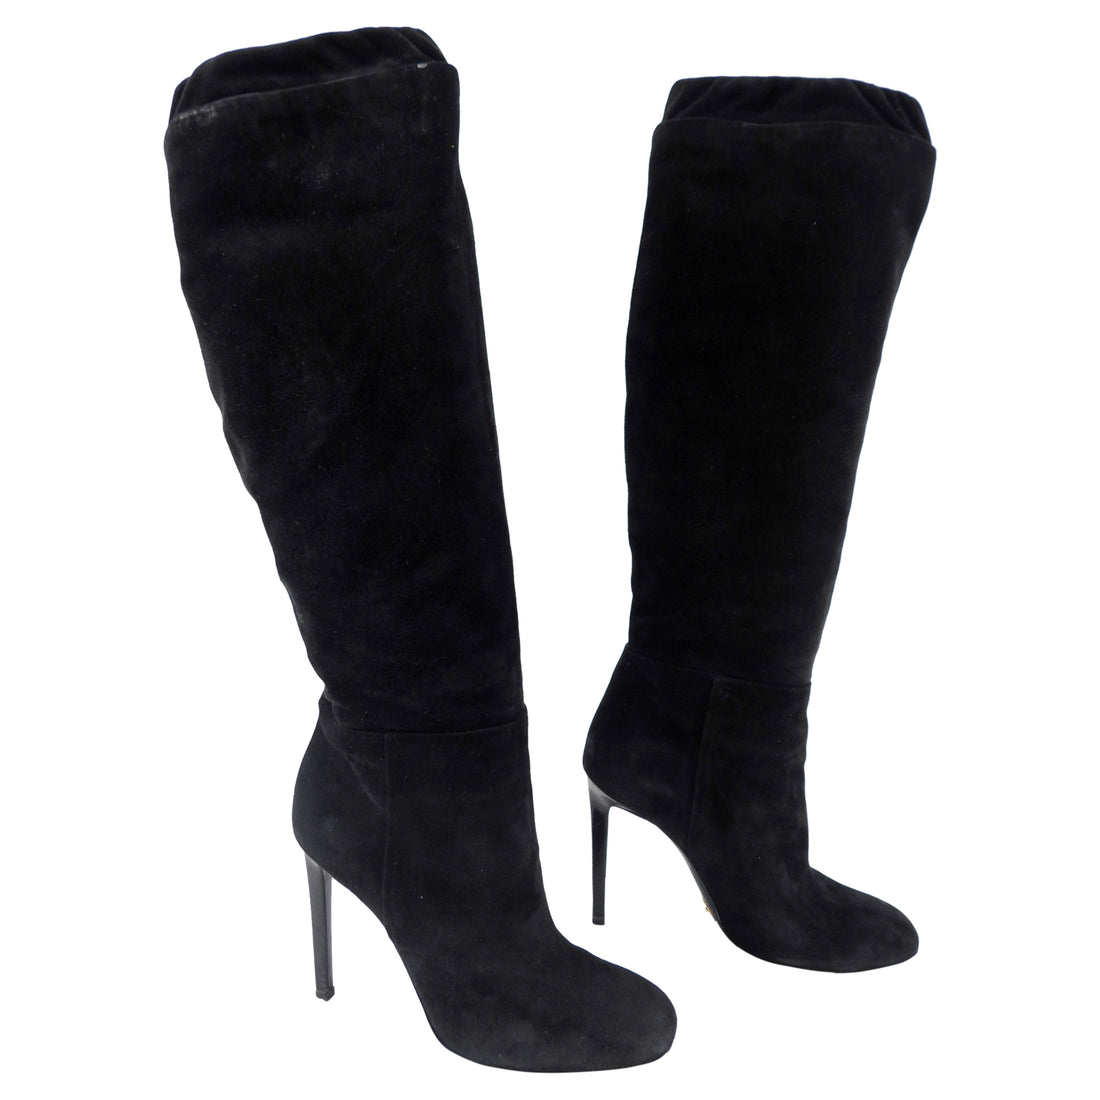 Tom Ford Black Suede Tall Boot - 6